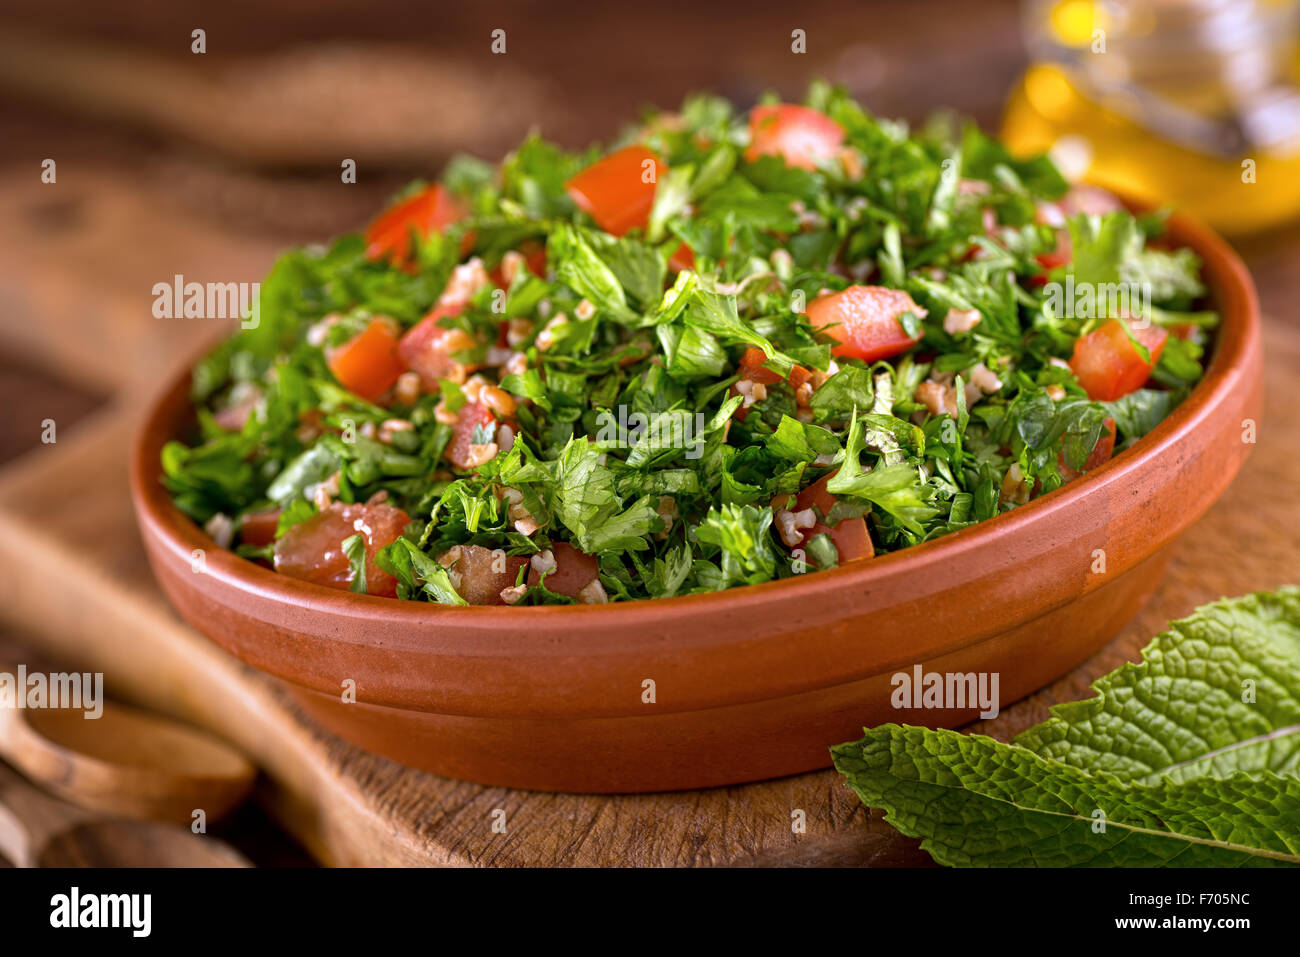 A bowl of delicious fresh tabouli with parsley, mint, tomato, onion, olive oil, lemon juice, and bulgar wheat. Stock Photo